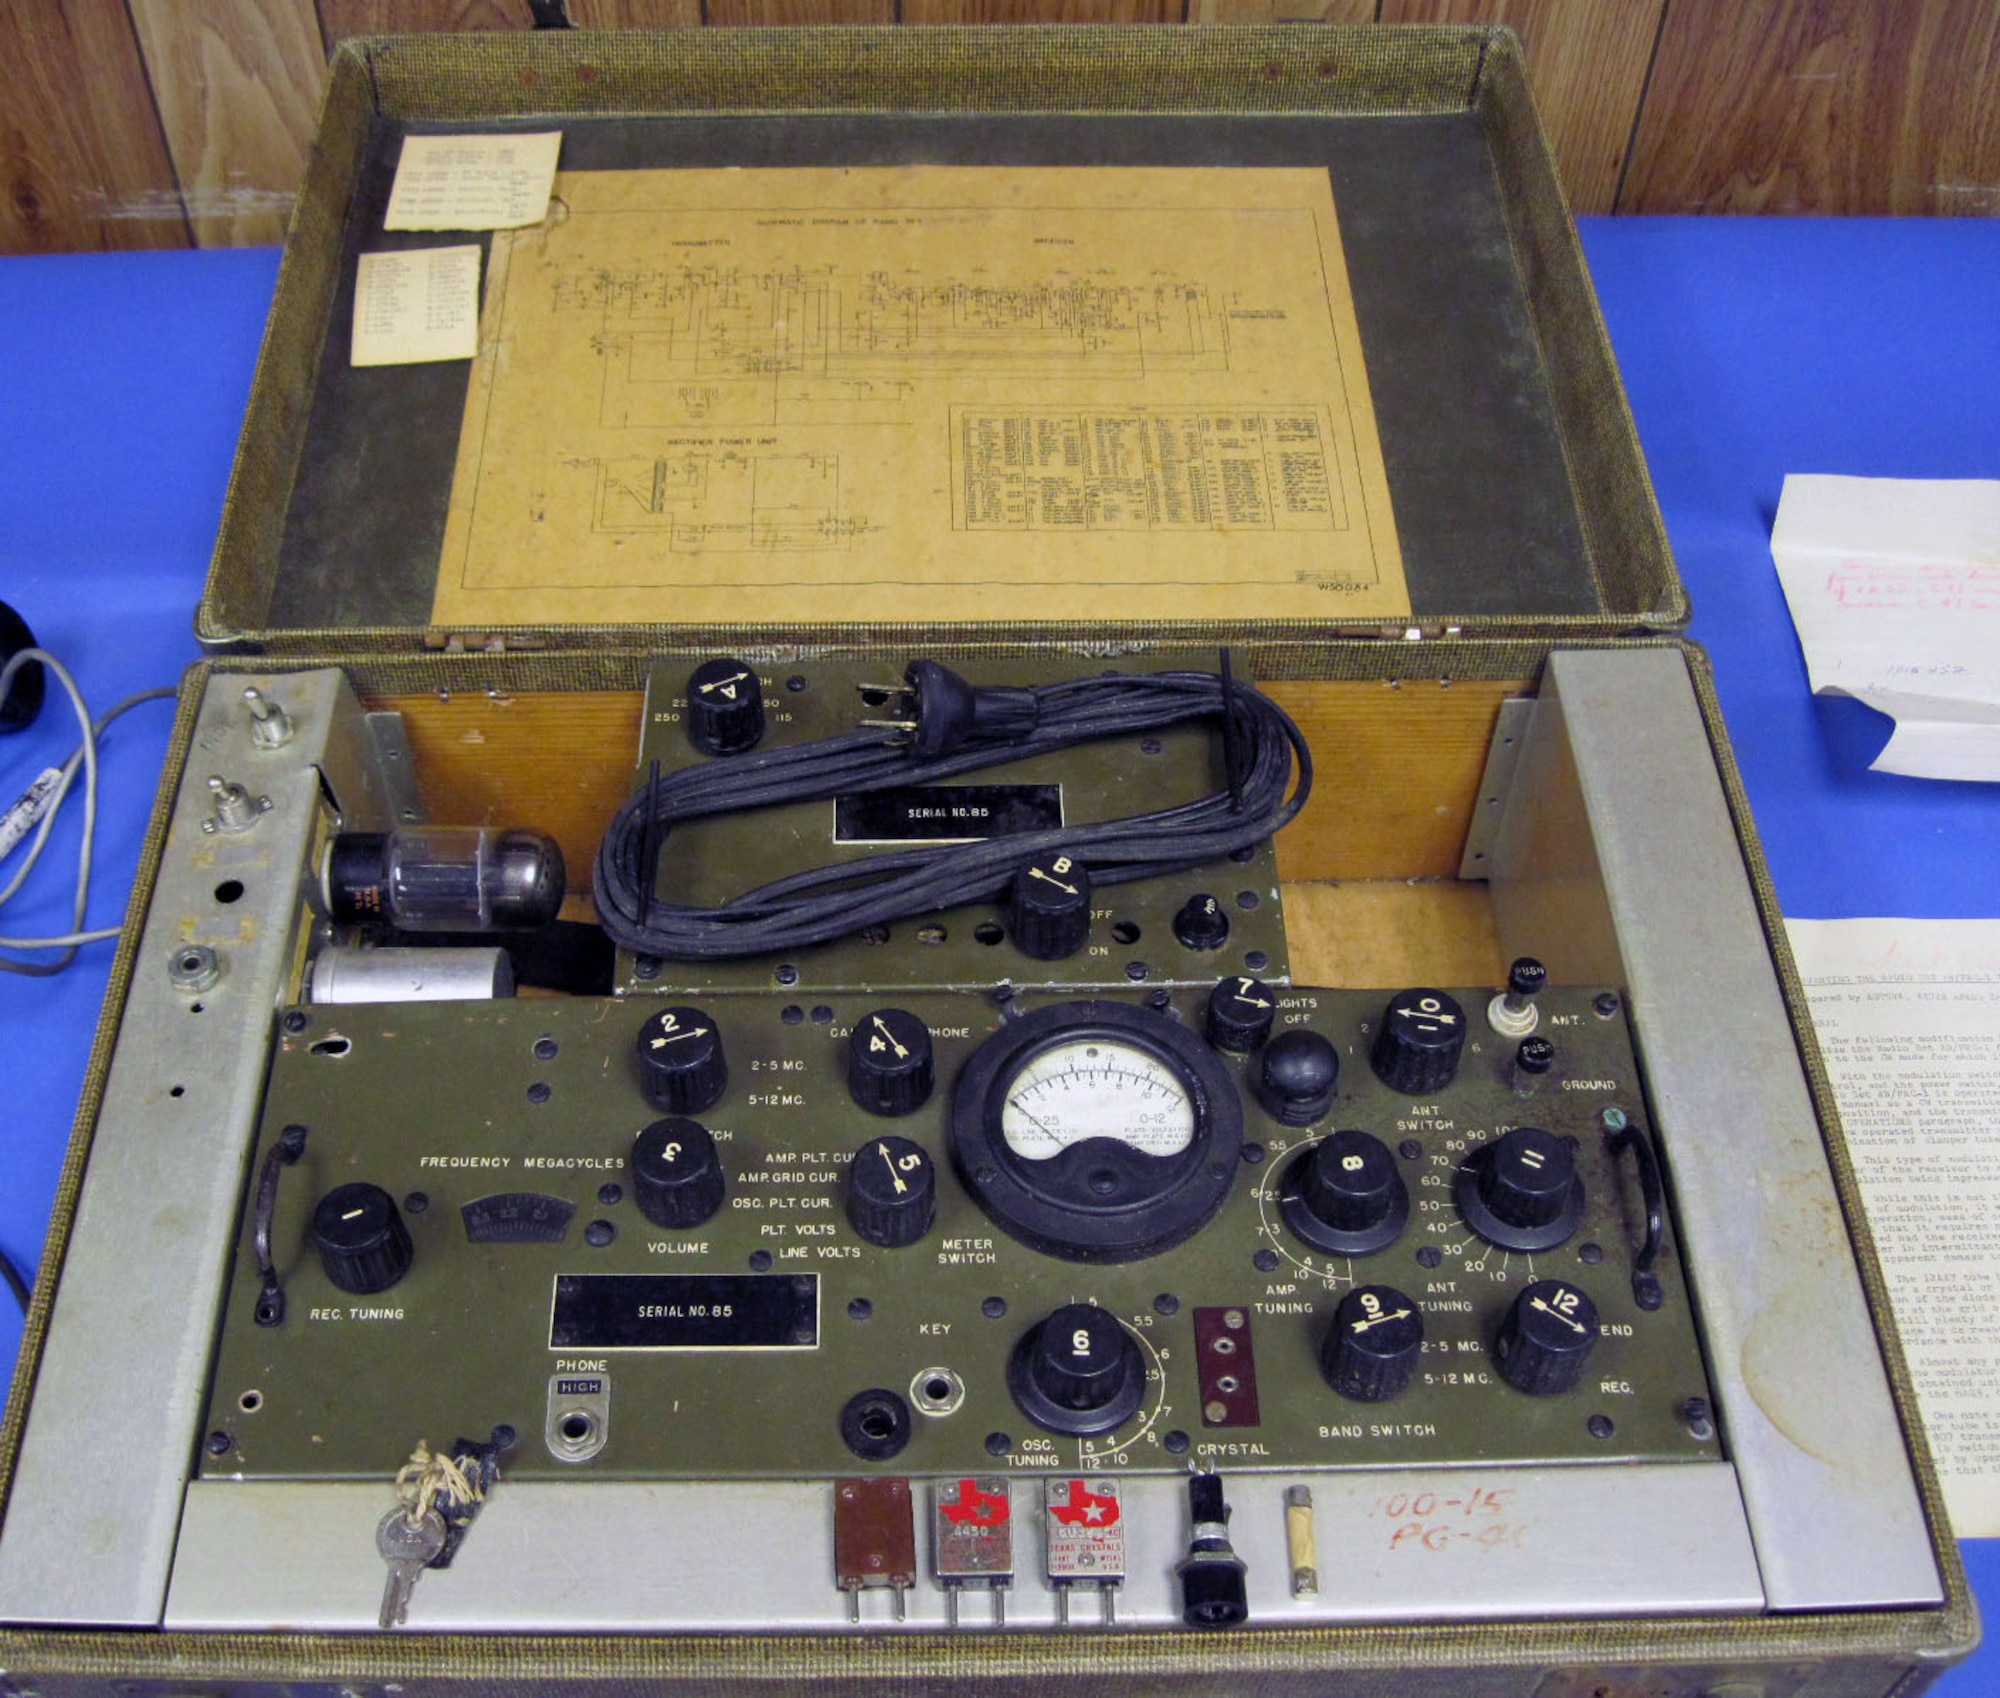 Originally designed for use by Army Intelligence, some of these radios were used by the Office of Strategic Services. The radio is concealed in a suitcase. (U.S. Air Force photo)